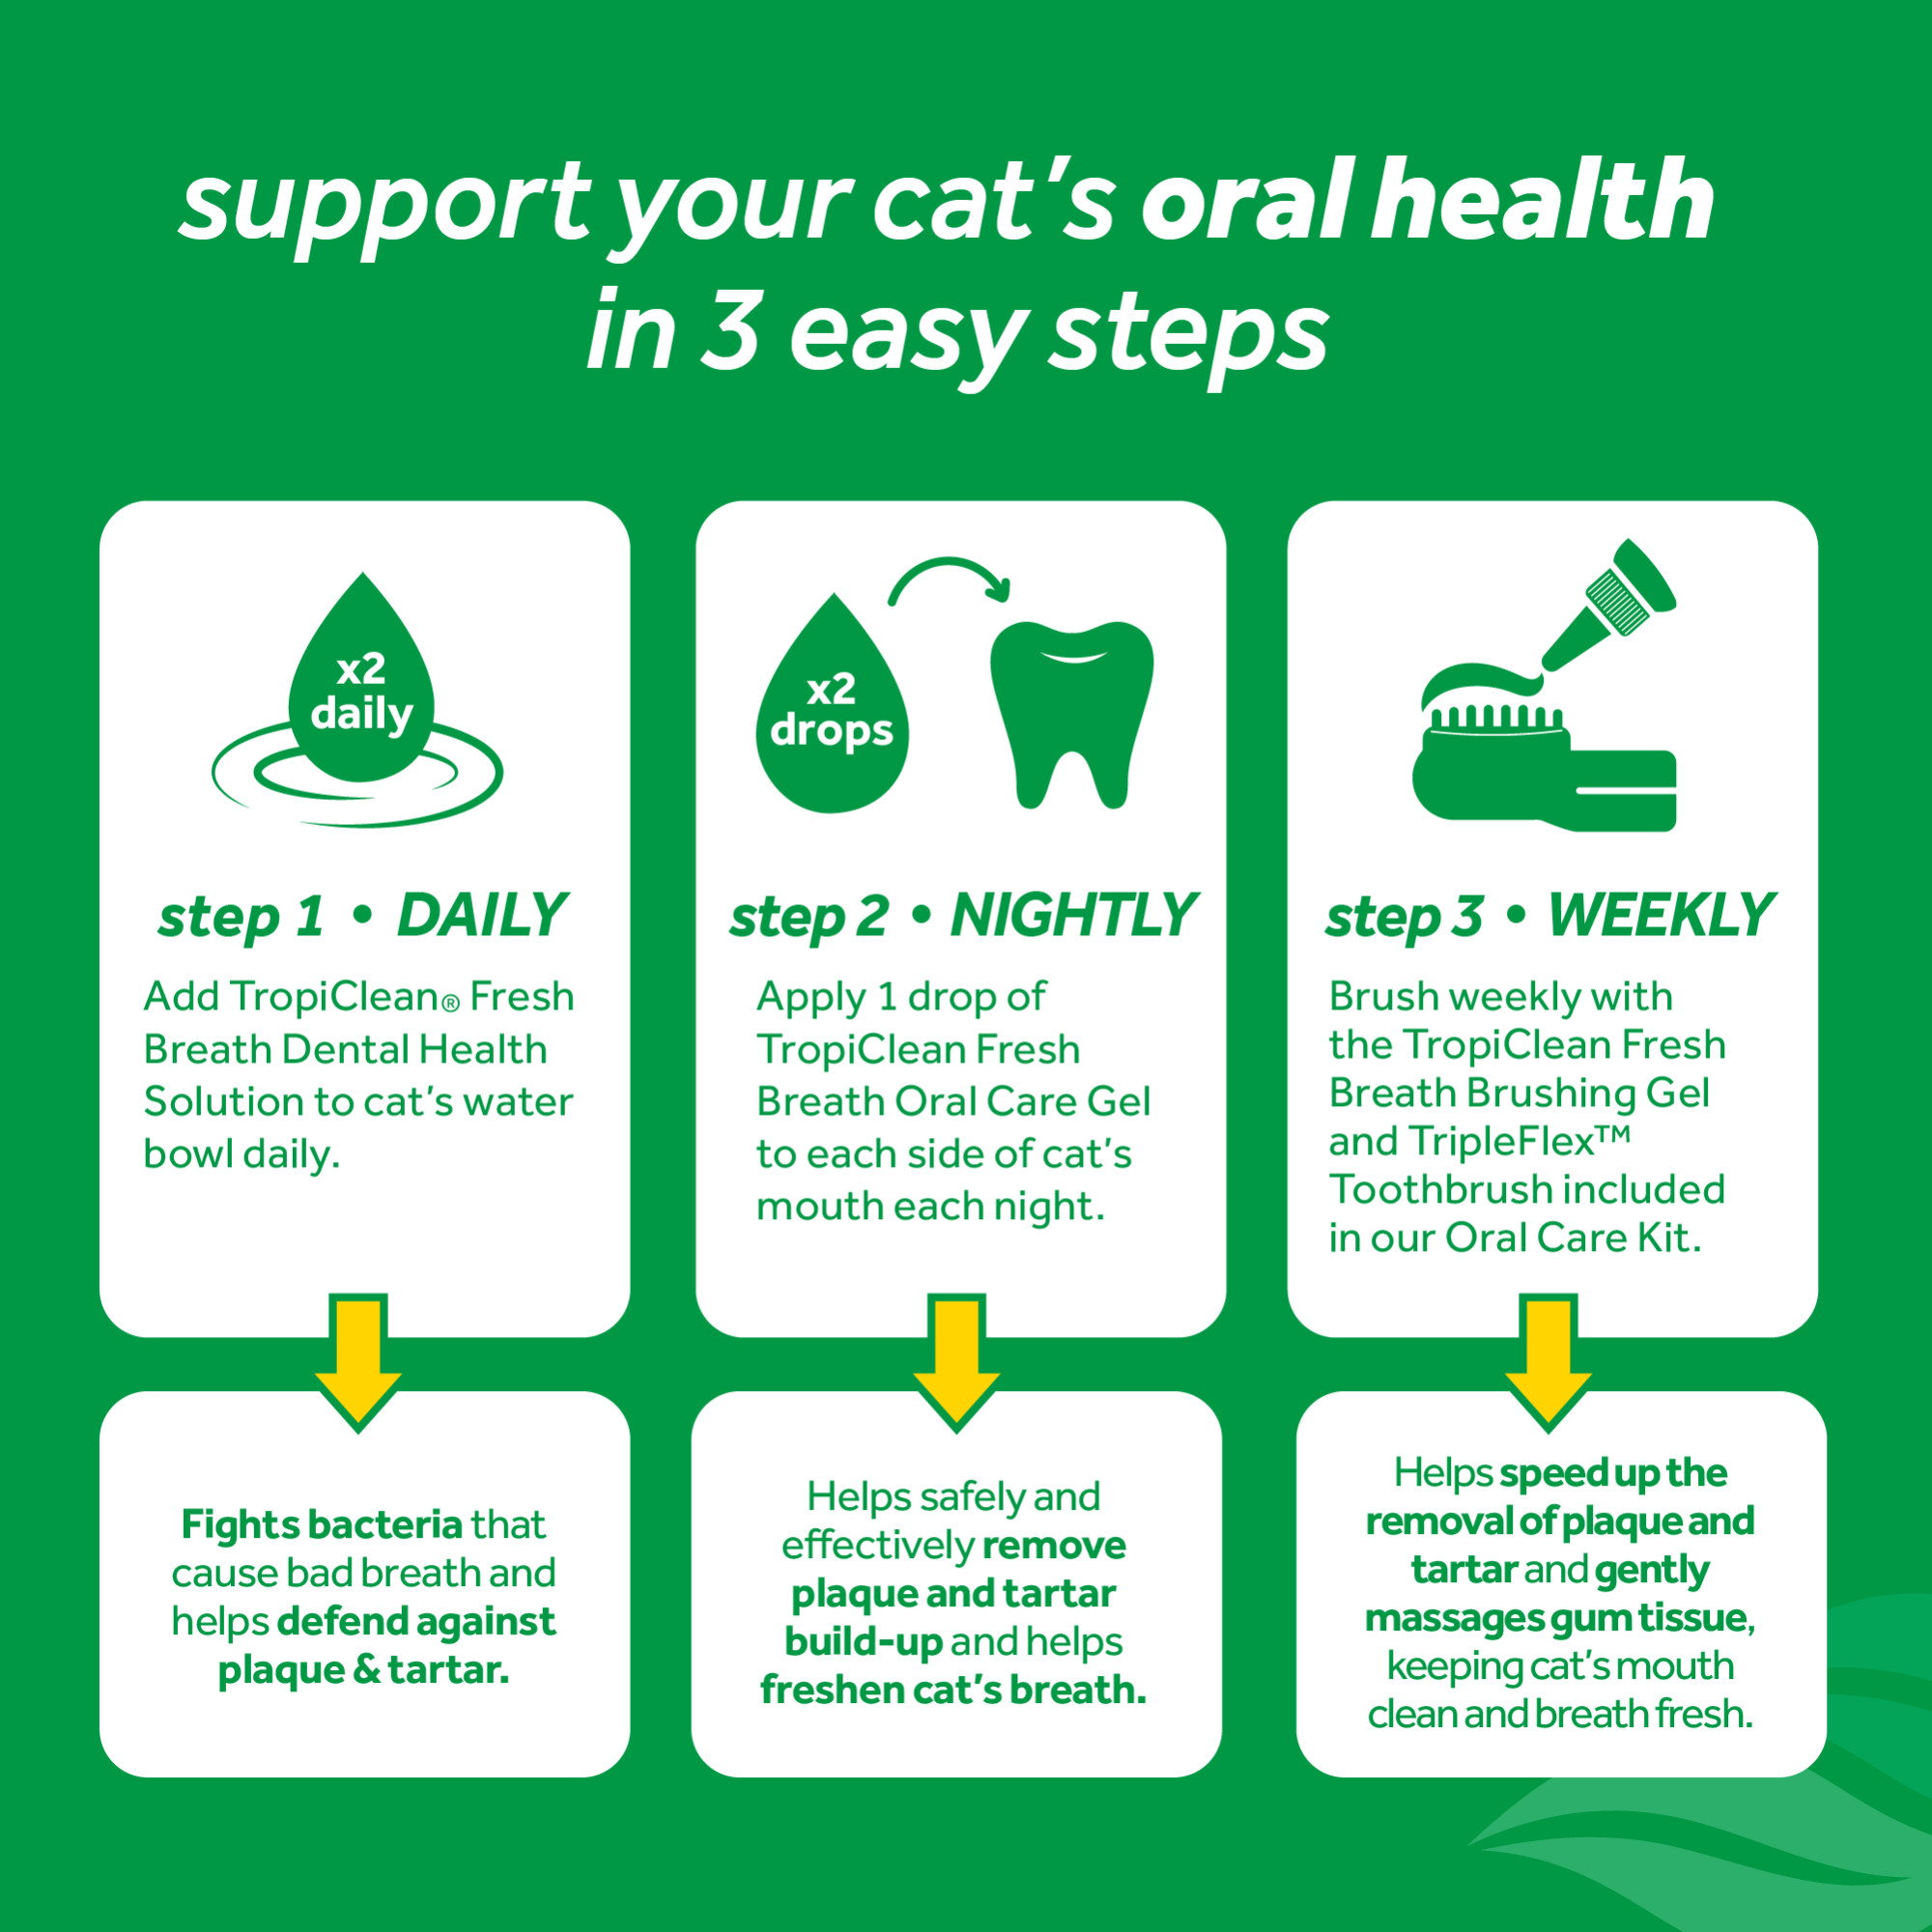 Dental Health Solution for Cats